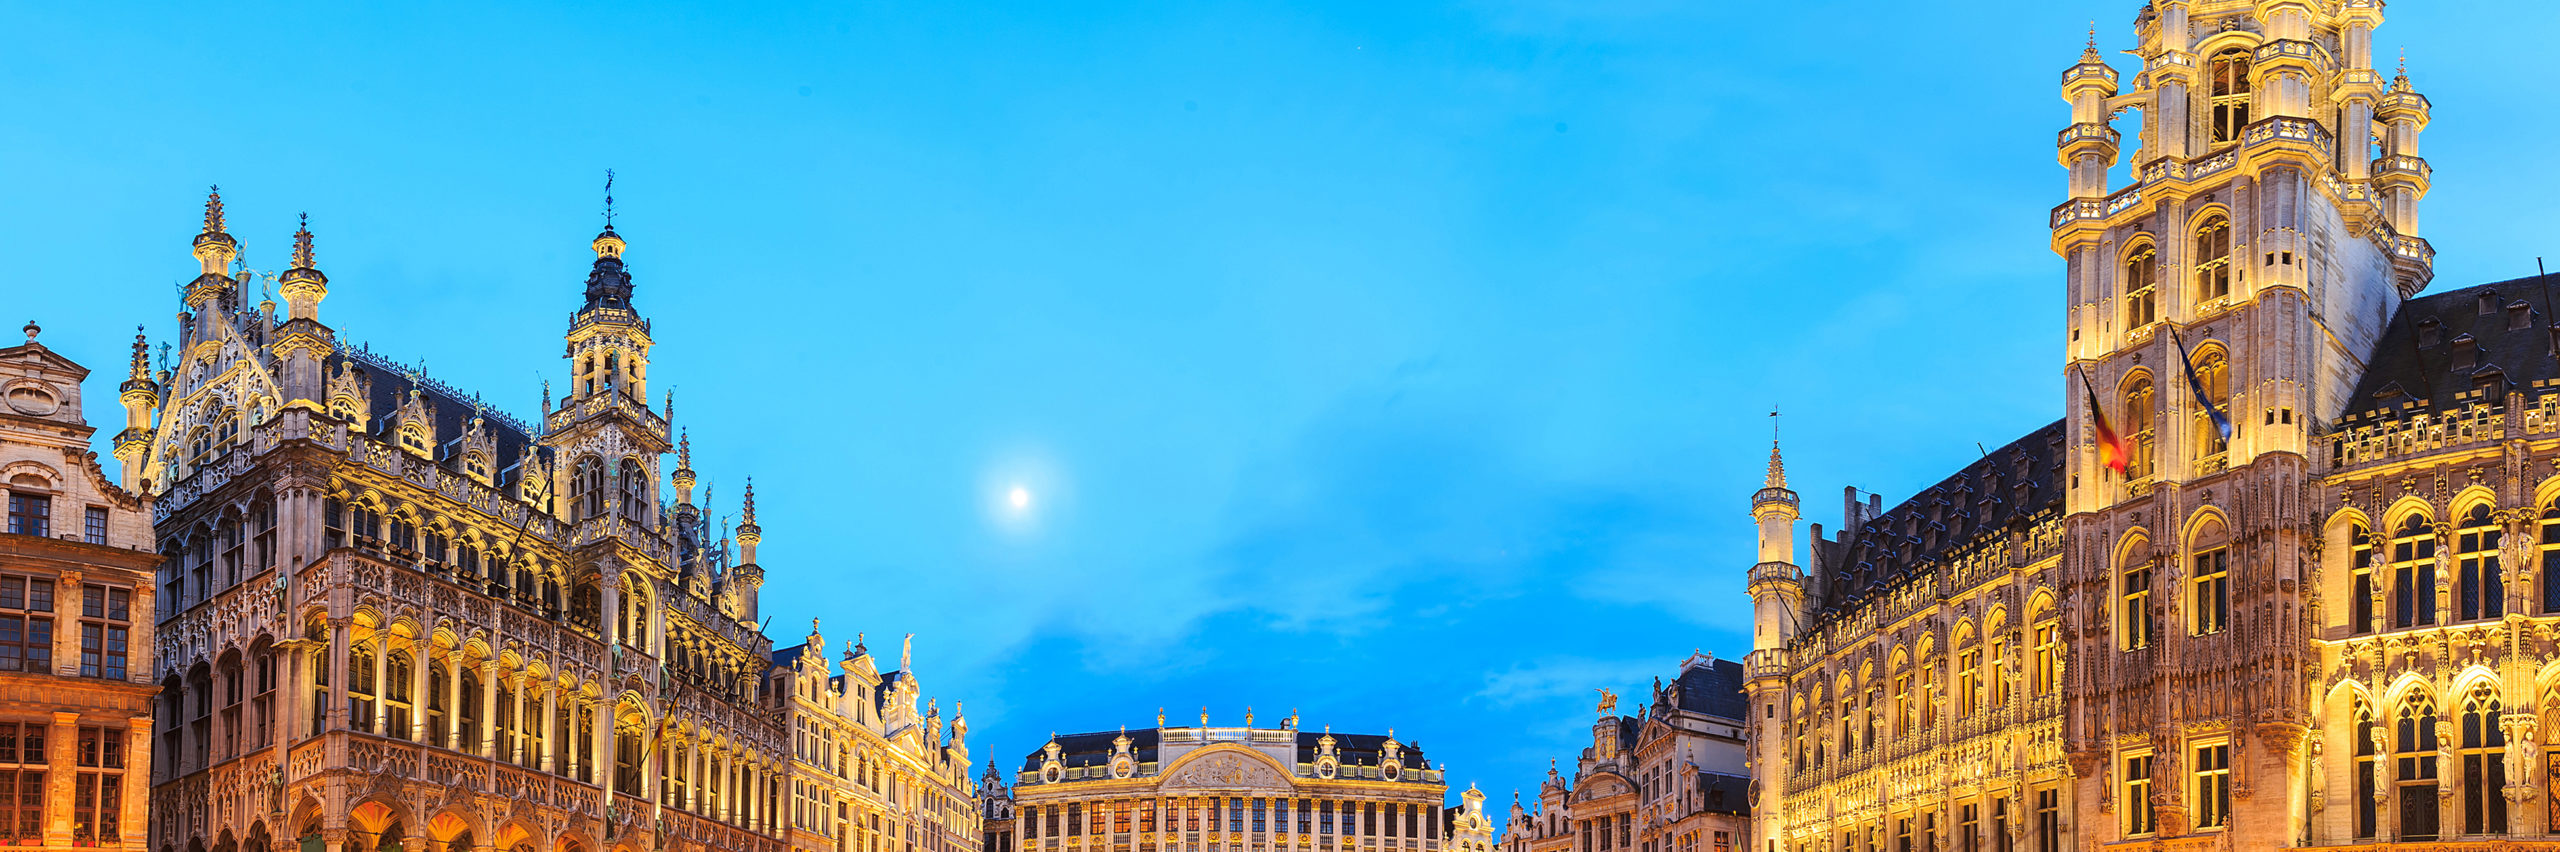 night scene of the Grand Place, the focal point of Brussels, Belgium. - Image